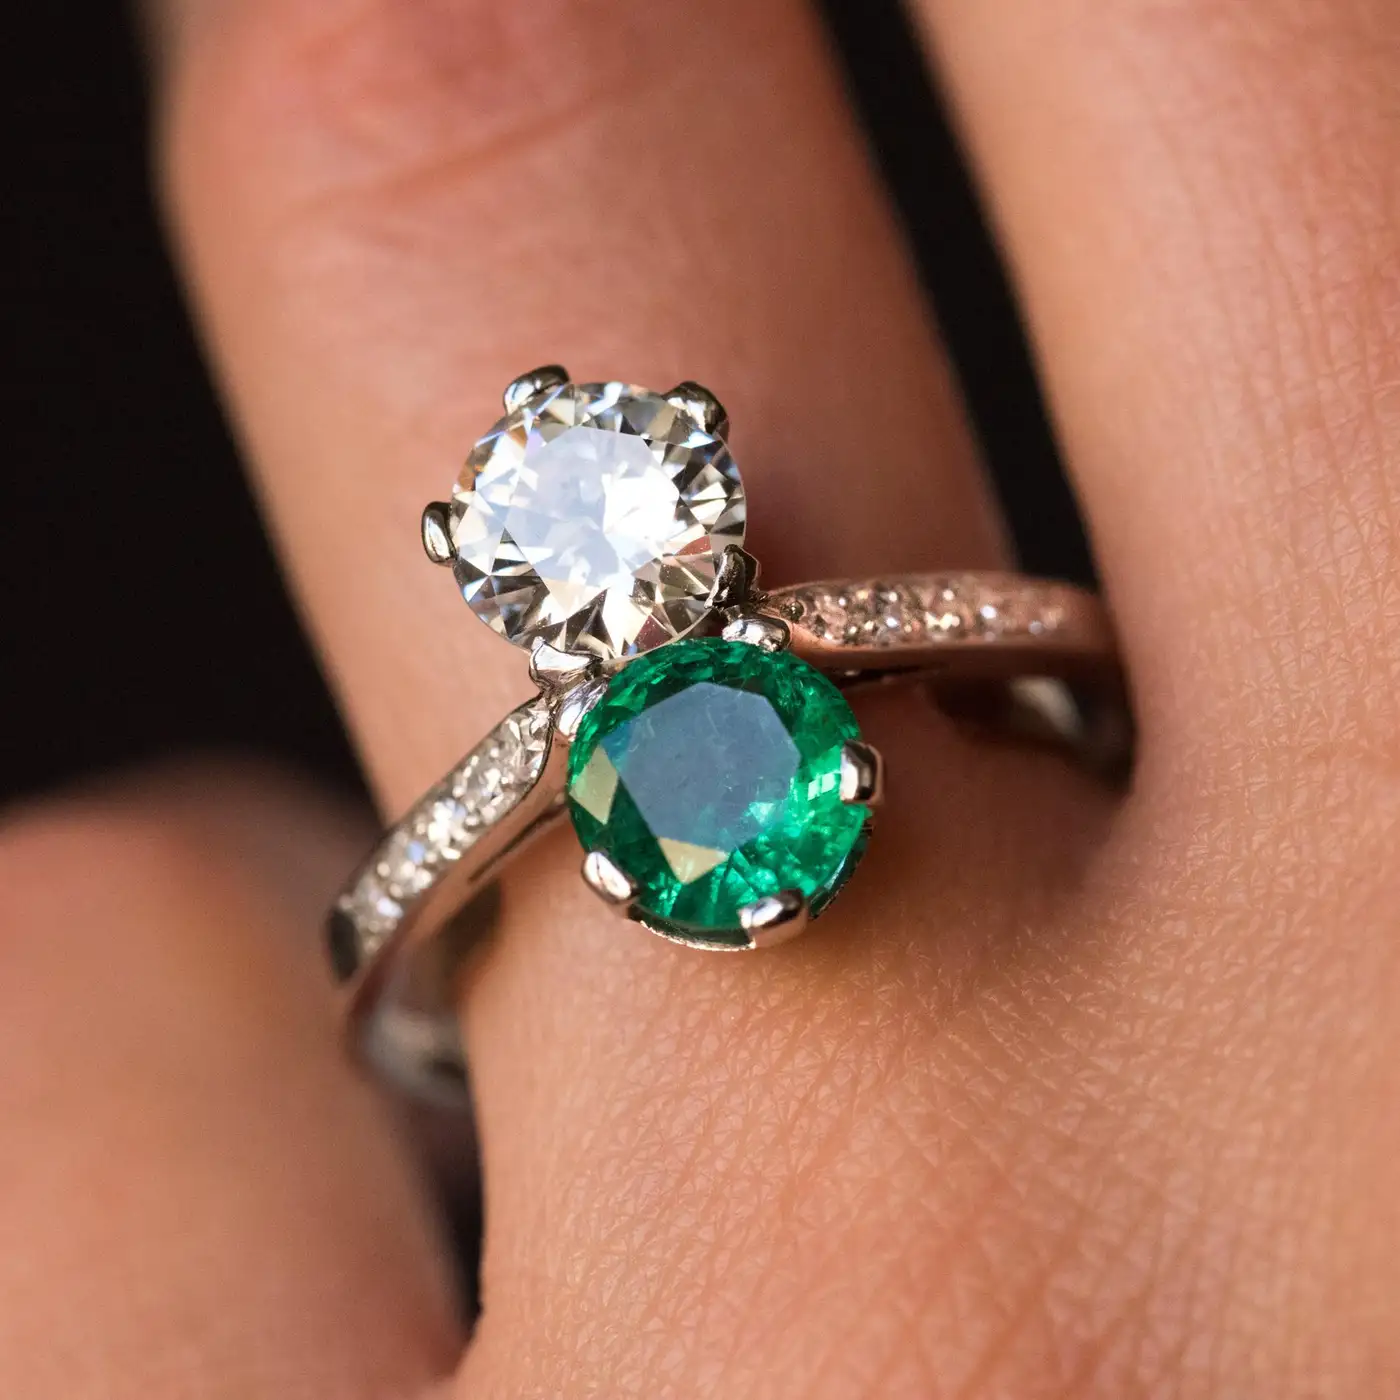 1930s-French-Platinum-Art-Deco-Emerald-Diamond-You-and-Me-Ring-9.webp